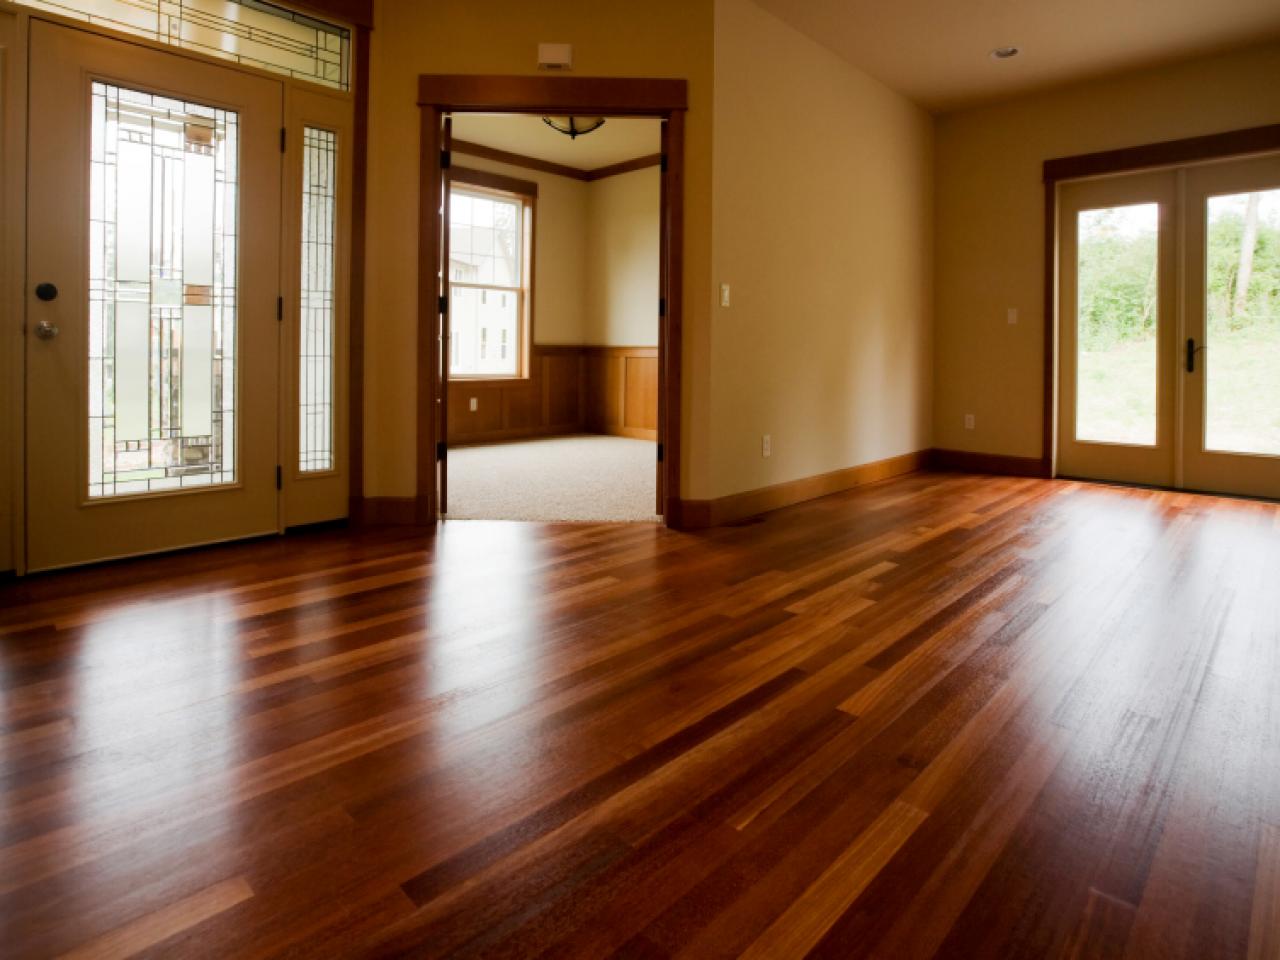 Cleaning Tile Wood And Vinyl Floors, Best Tile And Wood